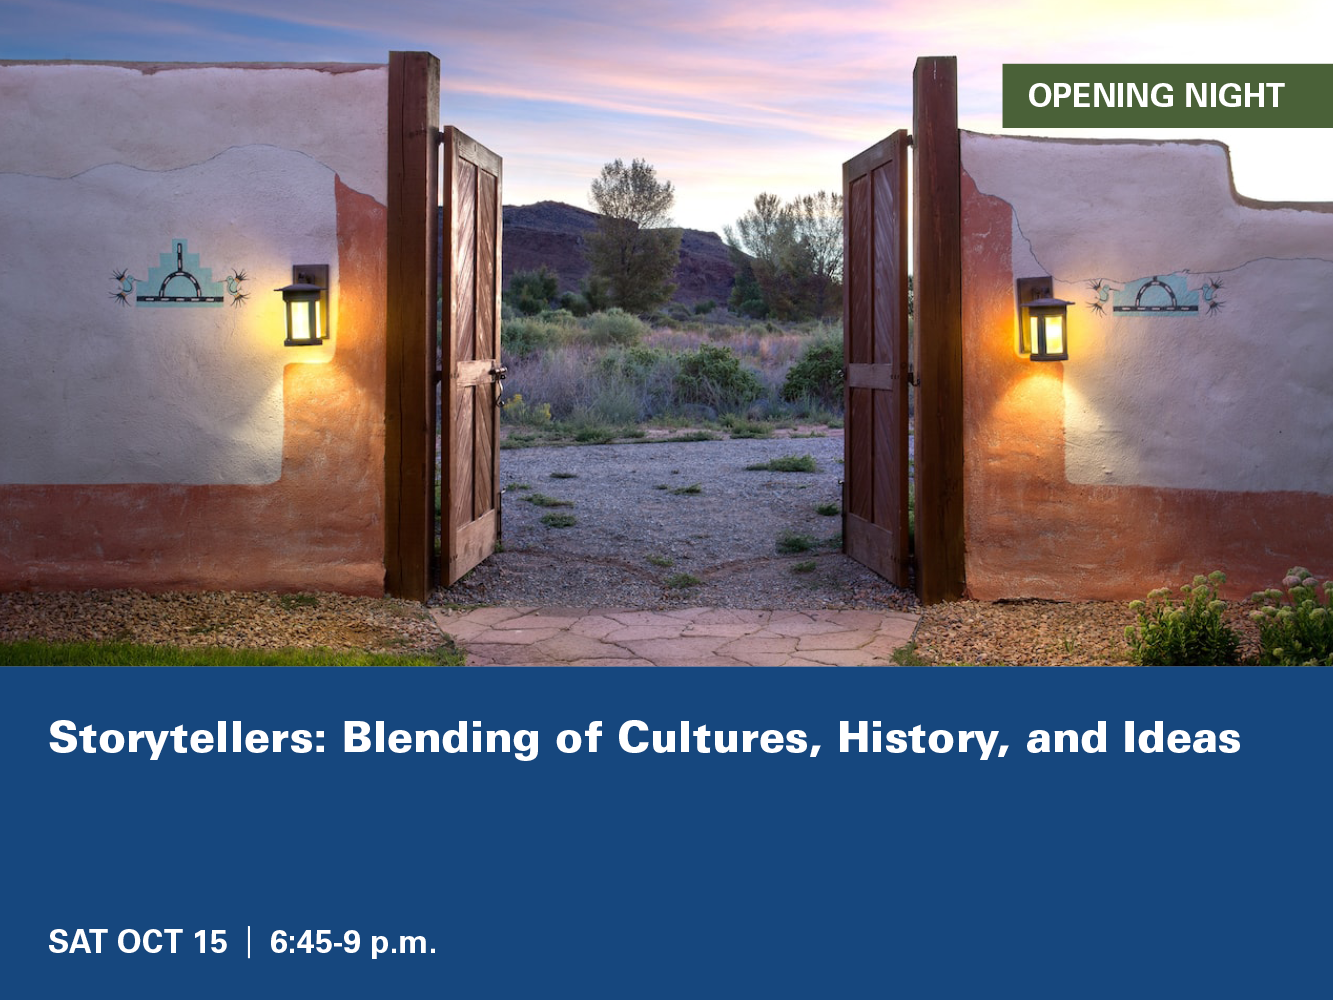 Storytellers: Blending of Cultures, History, and Ideas